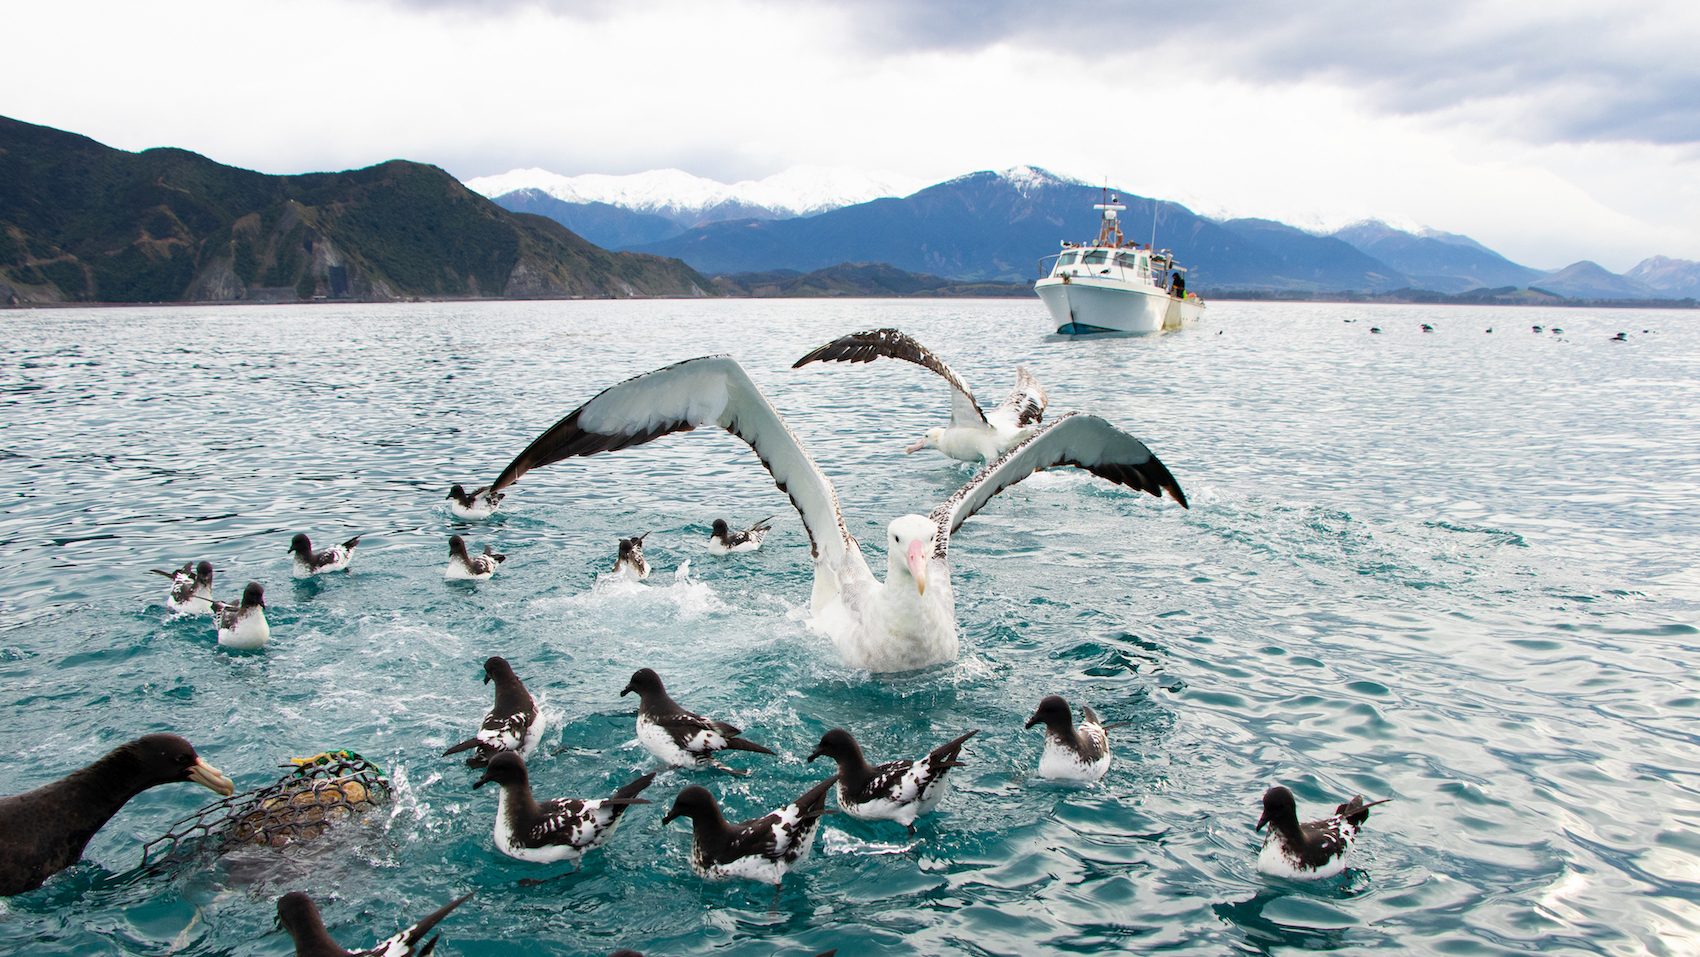 albatross on the ocean's surface with mountains and a bot in the background